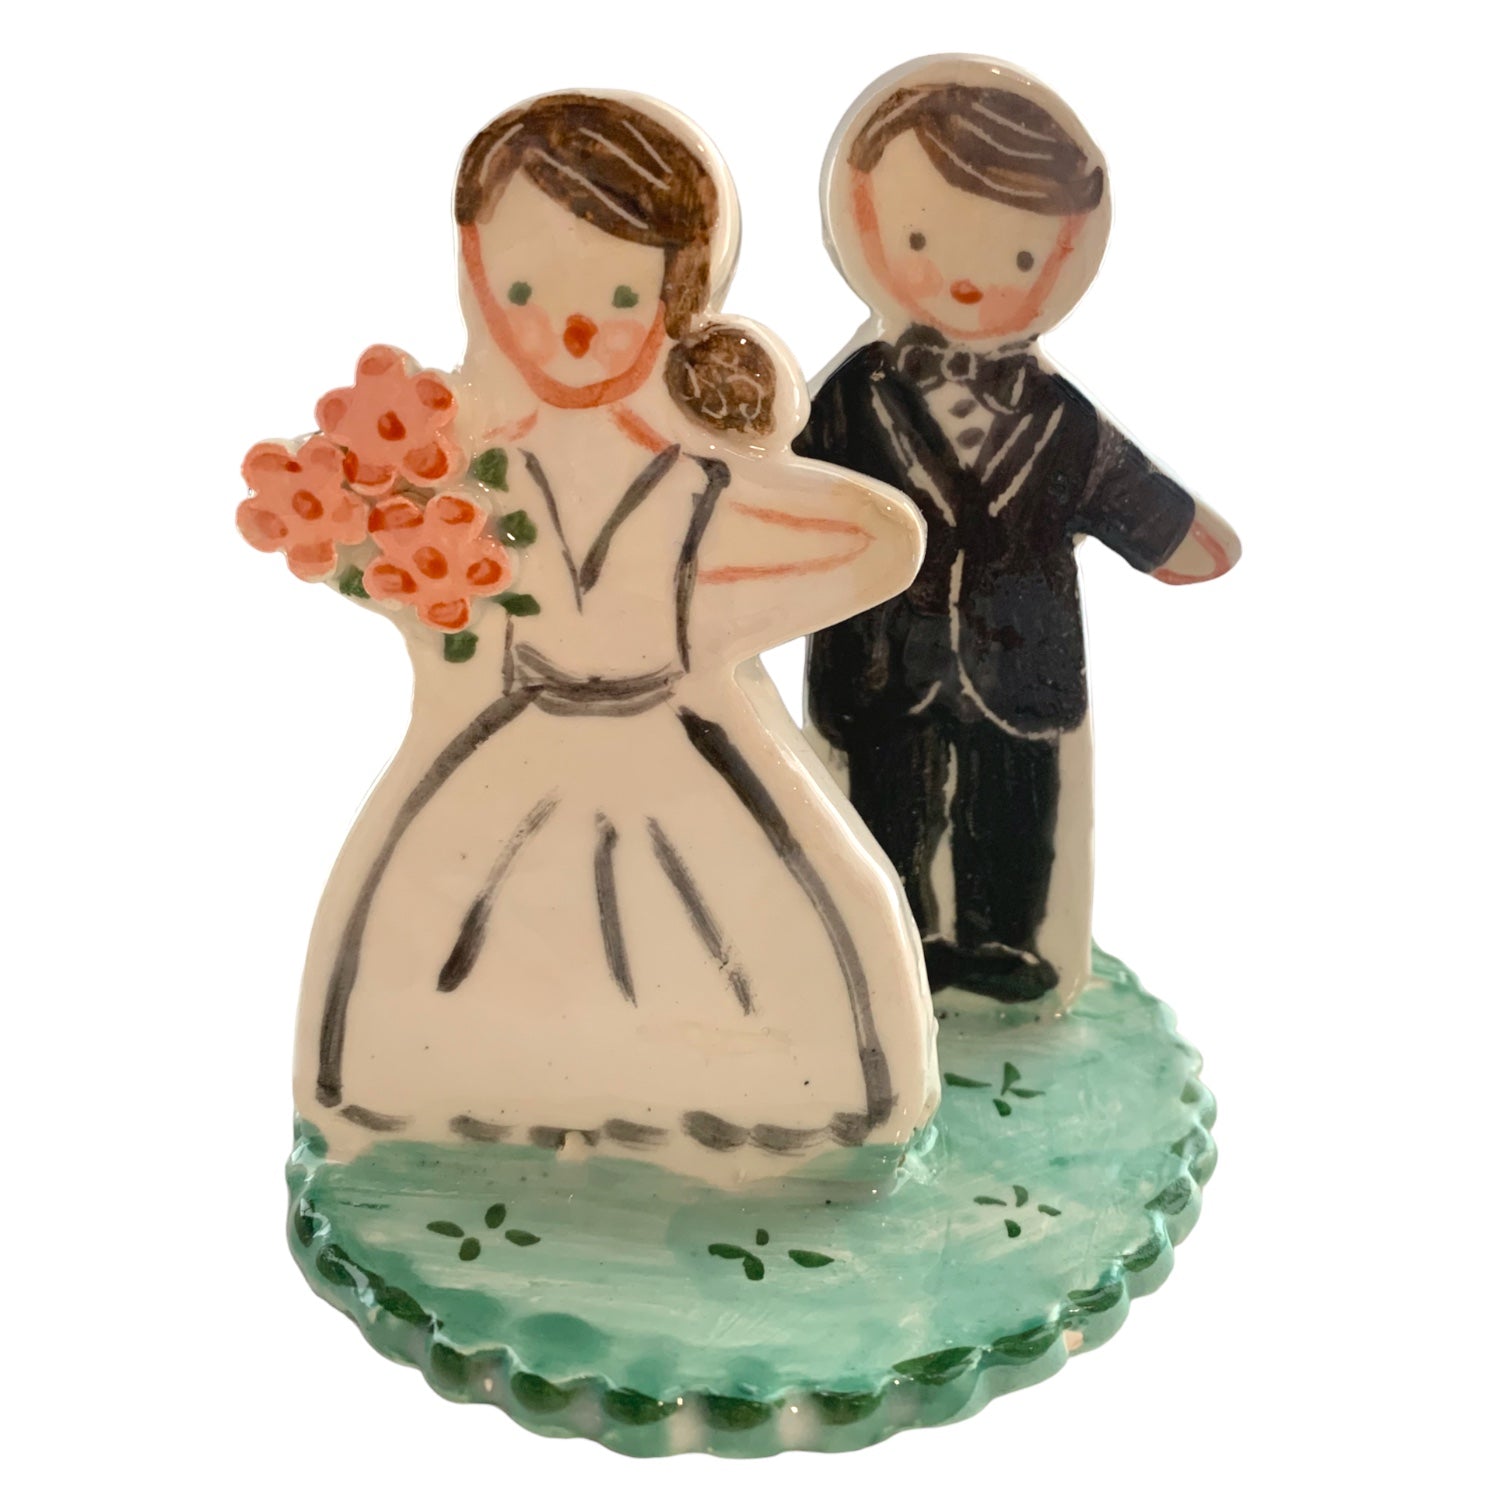 Wedding Cake Topper - Premium  from Tricia Lowenfield Design 